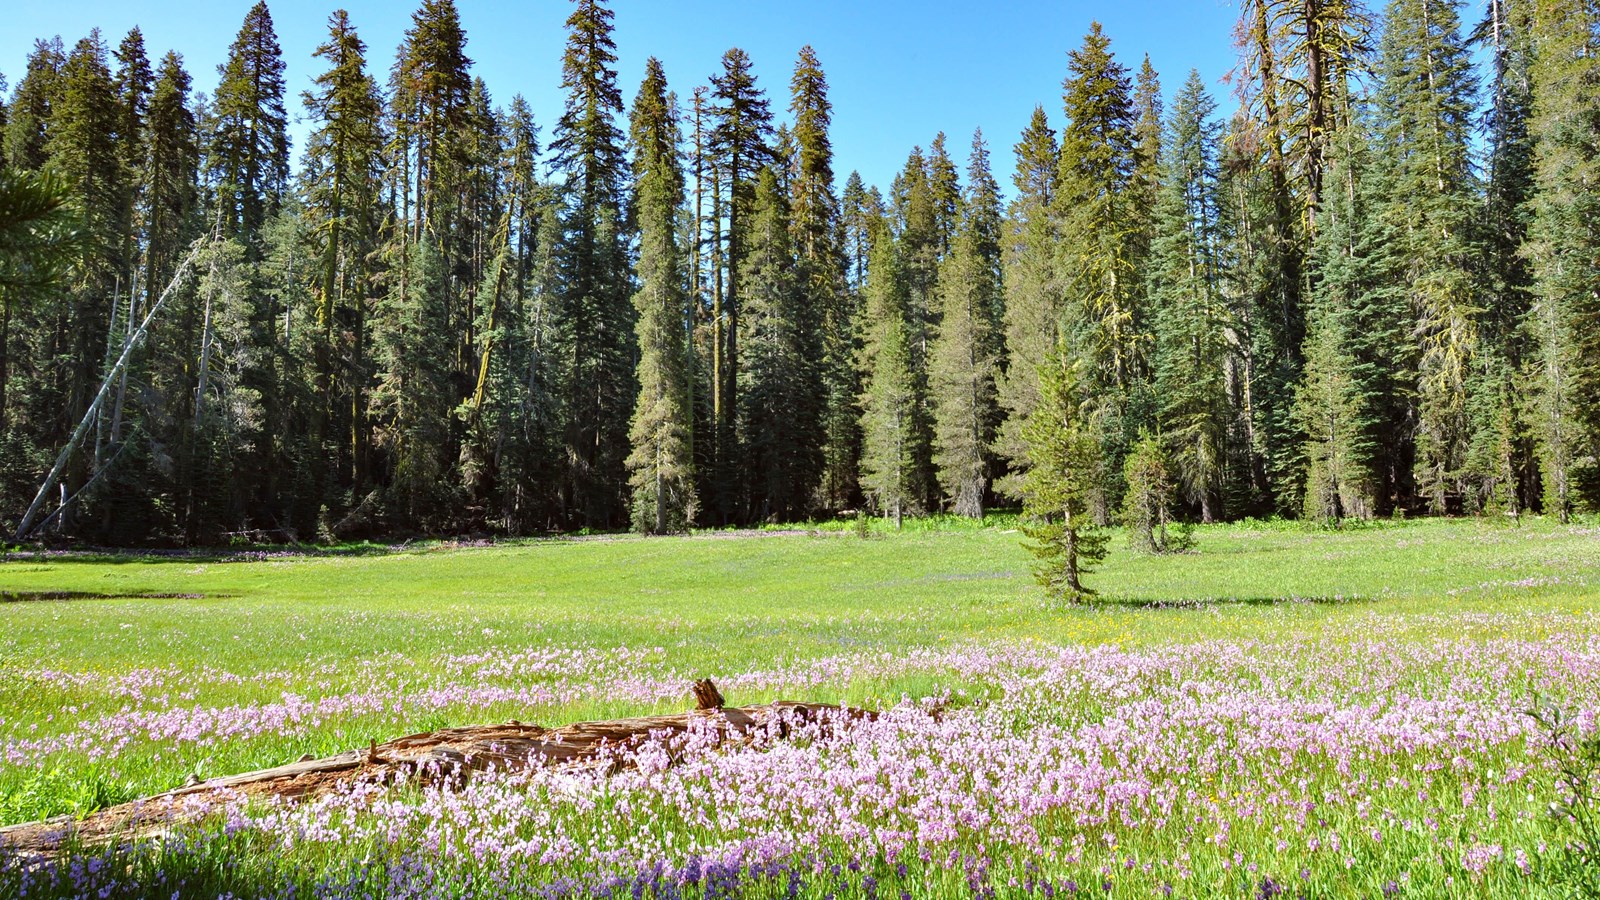 Grassy meadow with purple wildflowers in bloom